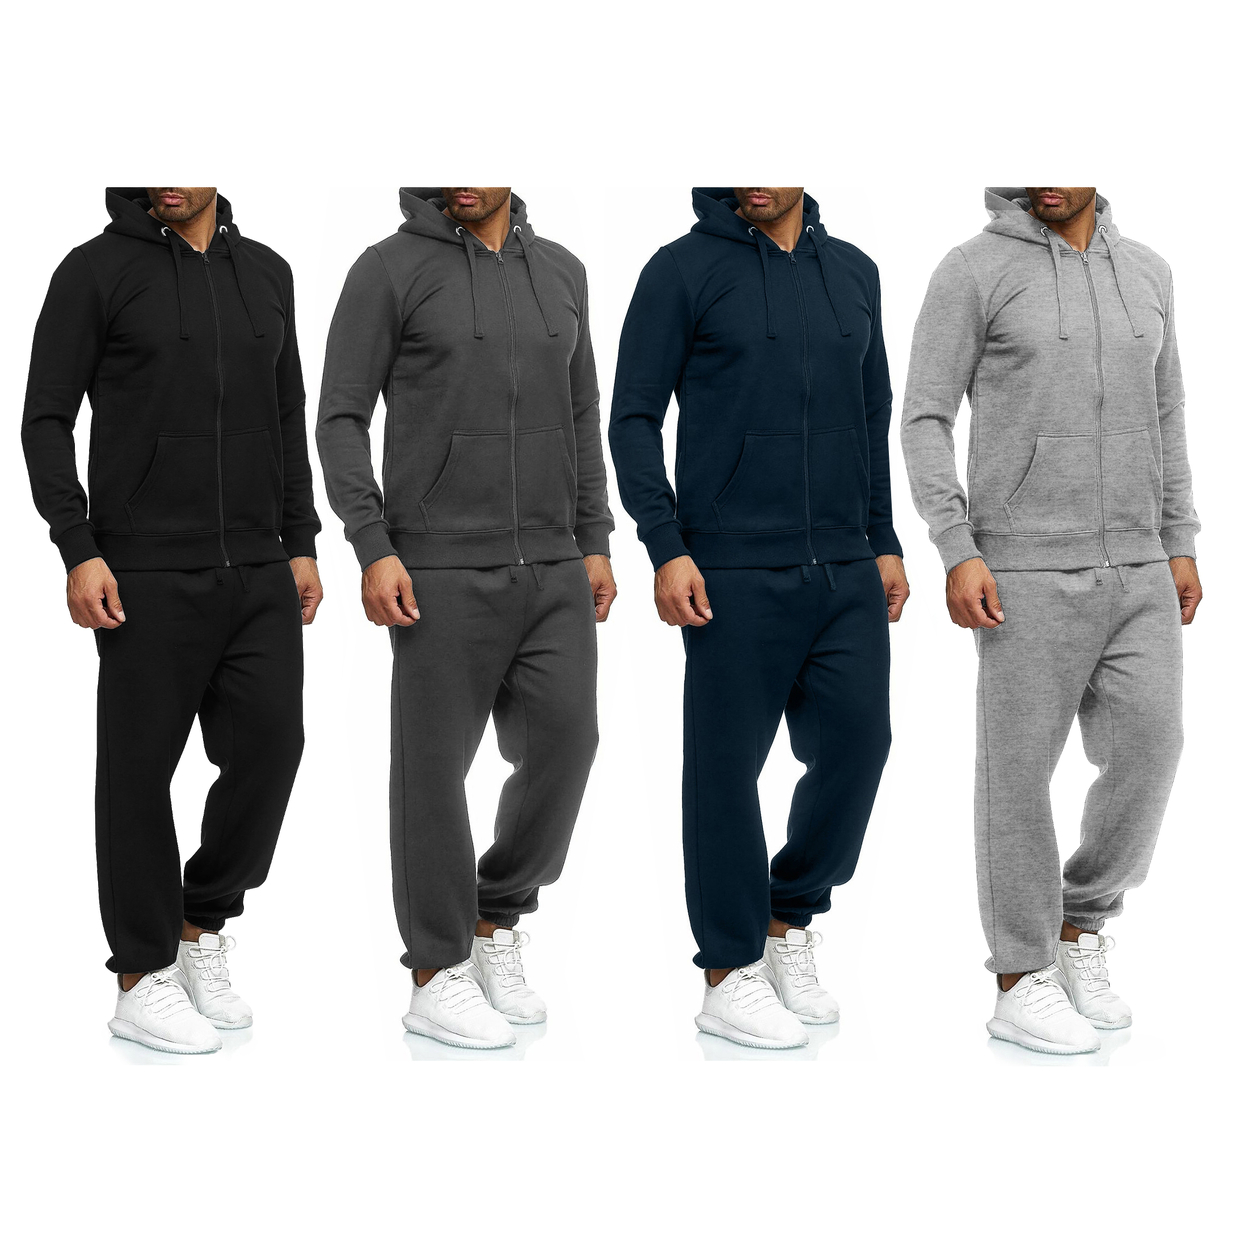 Multi-Pack: Men's Casual Big & Tall Athletic Active Winter Warm Fleece Lined Full Zip Tracksuit Jogger Set - Navy, 1-pack, Xx-large